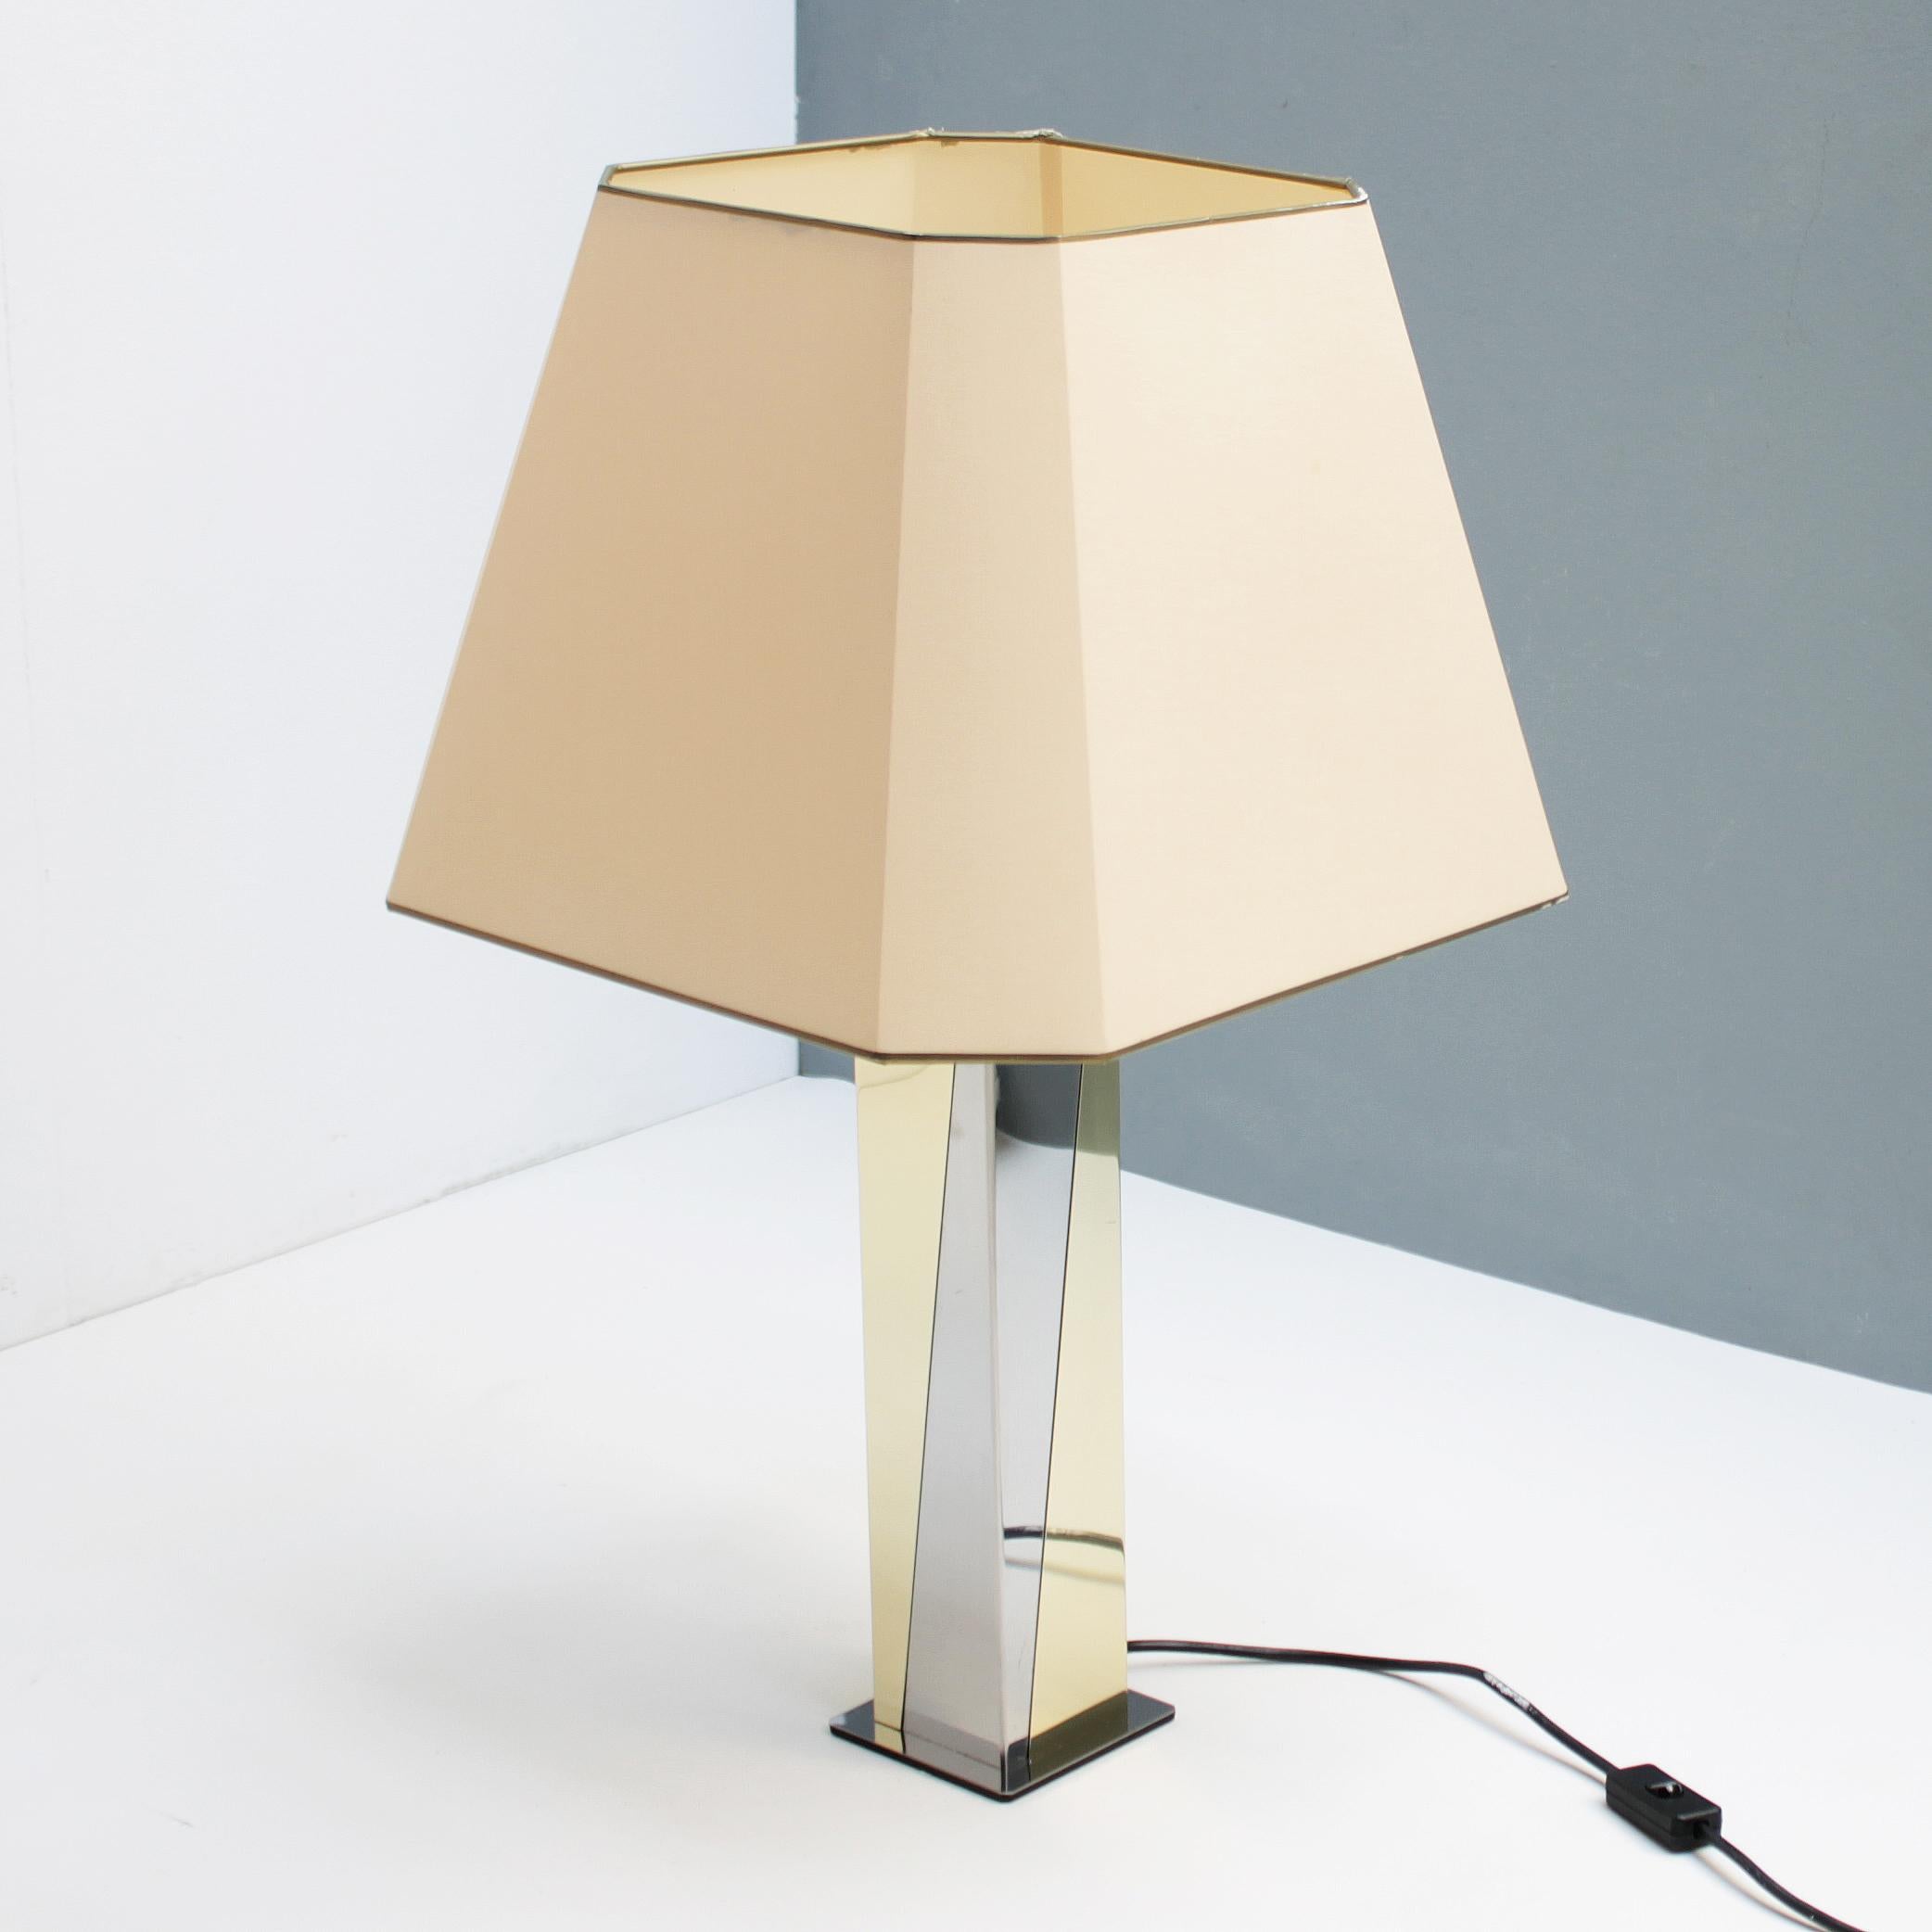 Mid-Century Modern Architectural Table Lamp in the Manner of Paul Evans For Sale